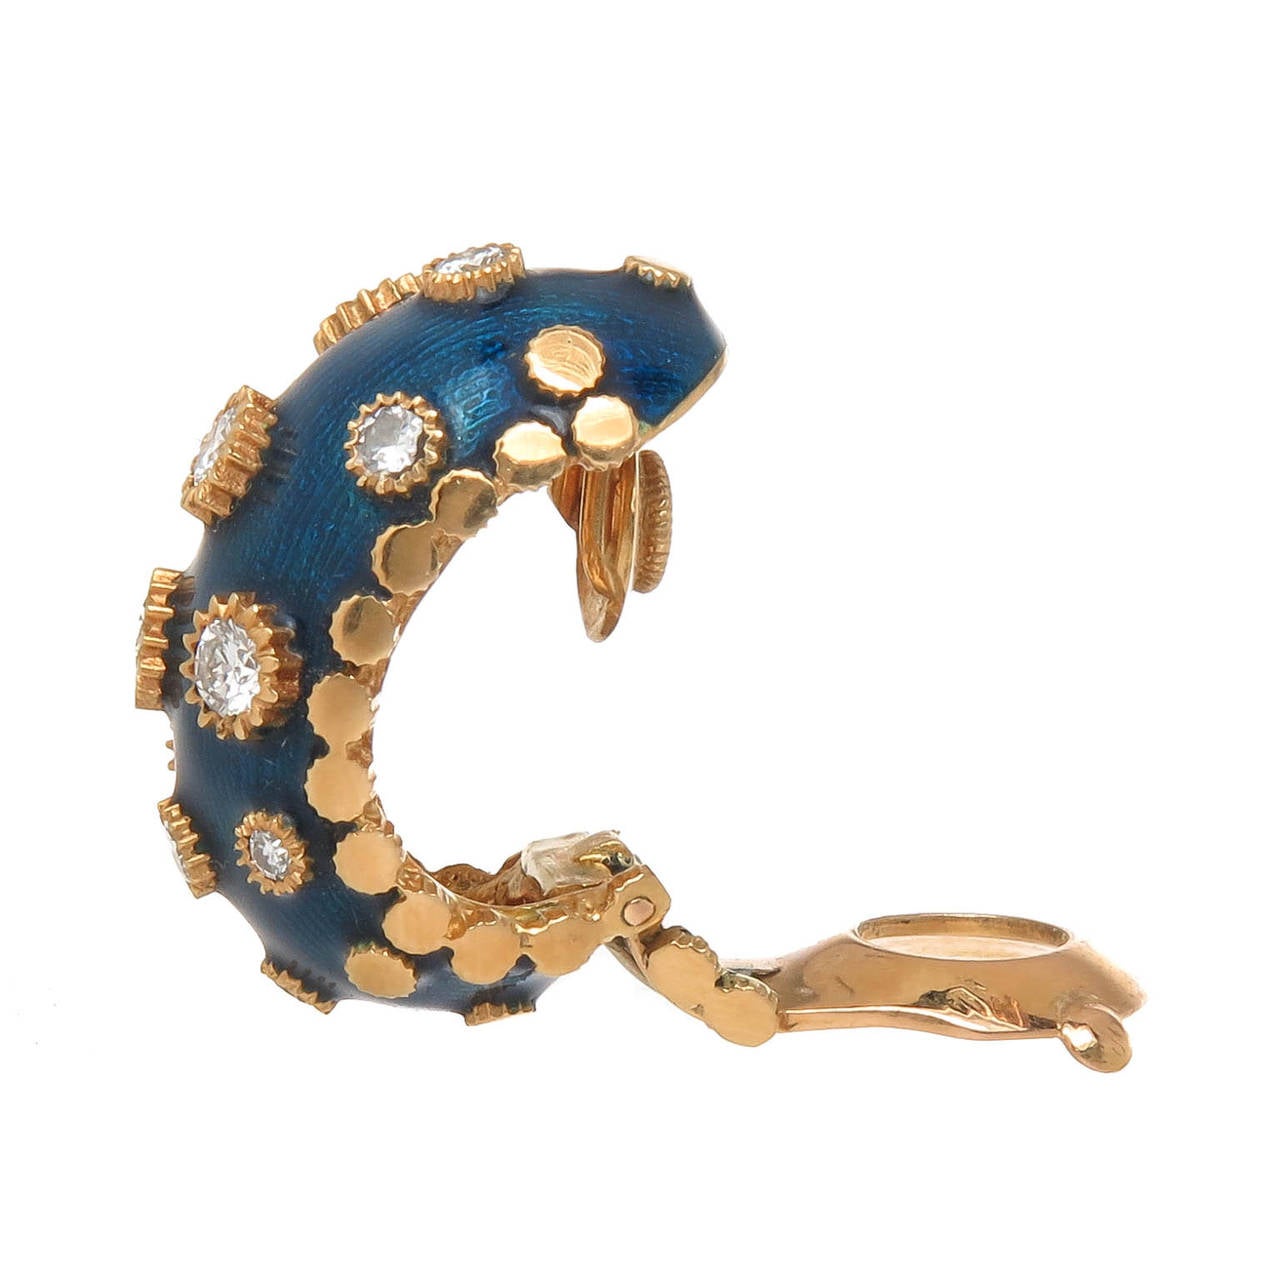 Circa 1990 Van Cleef and Arpels 18K yellow gold ear clips, finished in blue guilloche enamel and set with round brilliant cut diamonds totaling 1.30 Carat. Beautiful detailing, signed, numbered and having French hallmarks.  A post can be added to